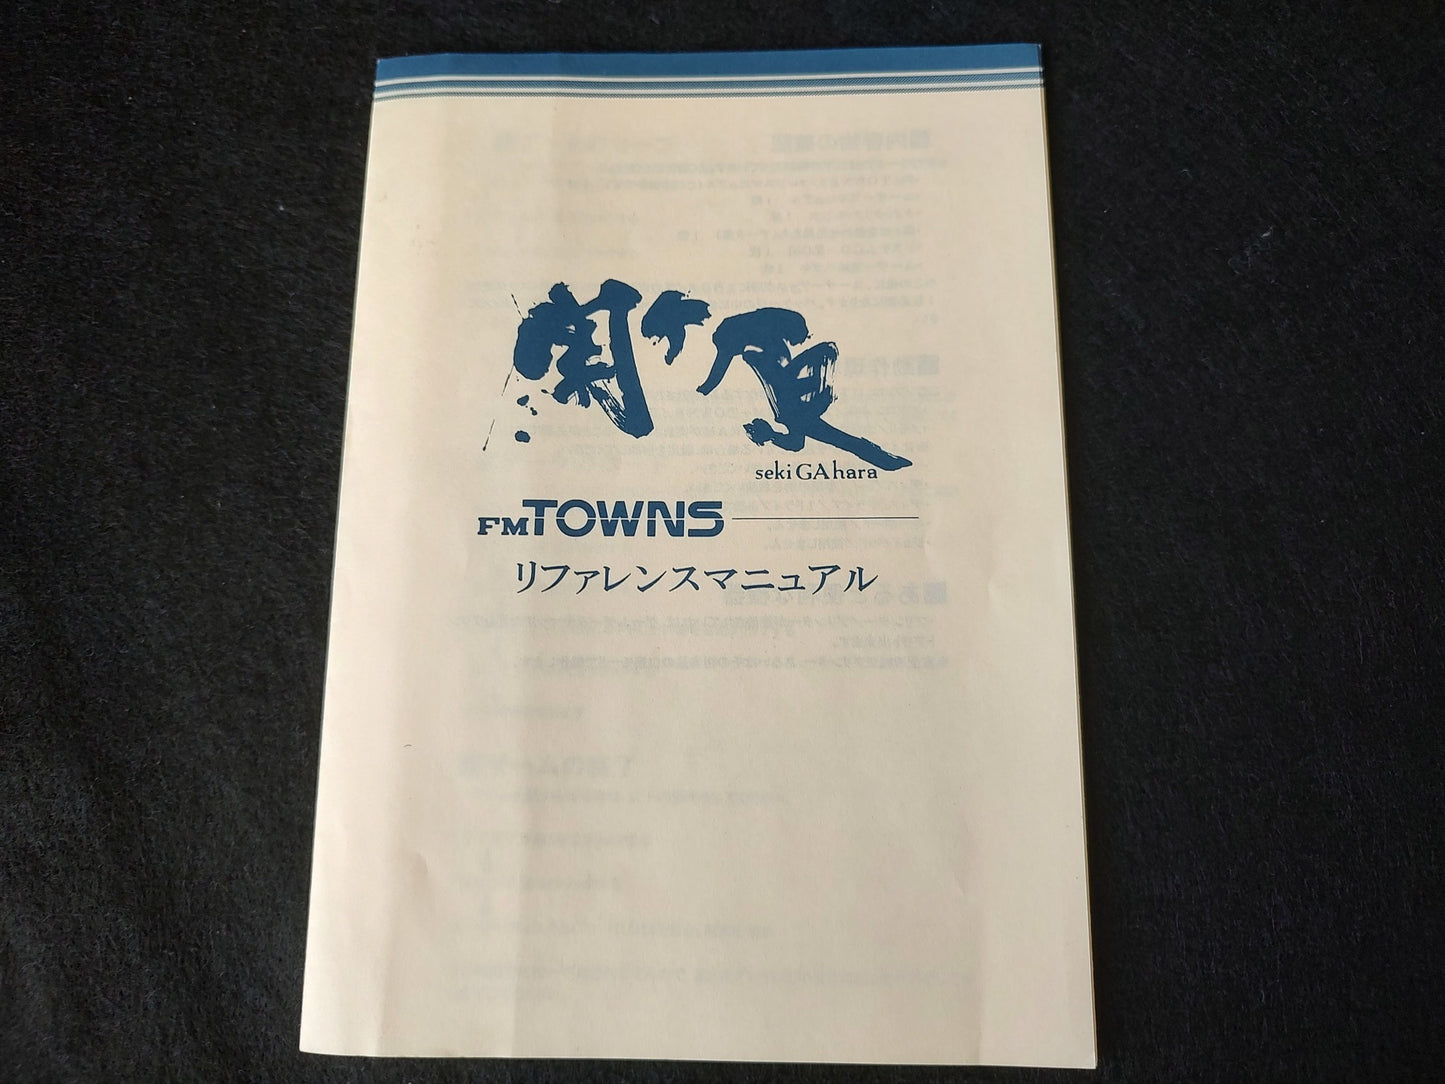 Sekigahara FM TOWNS Marty Game, Disk, w/Manual and Box set, Working-f0629-